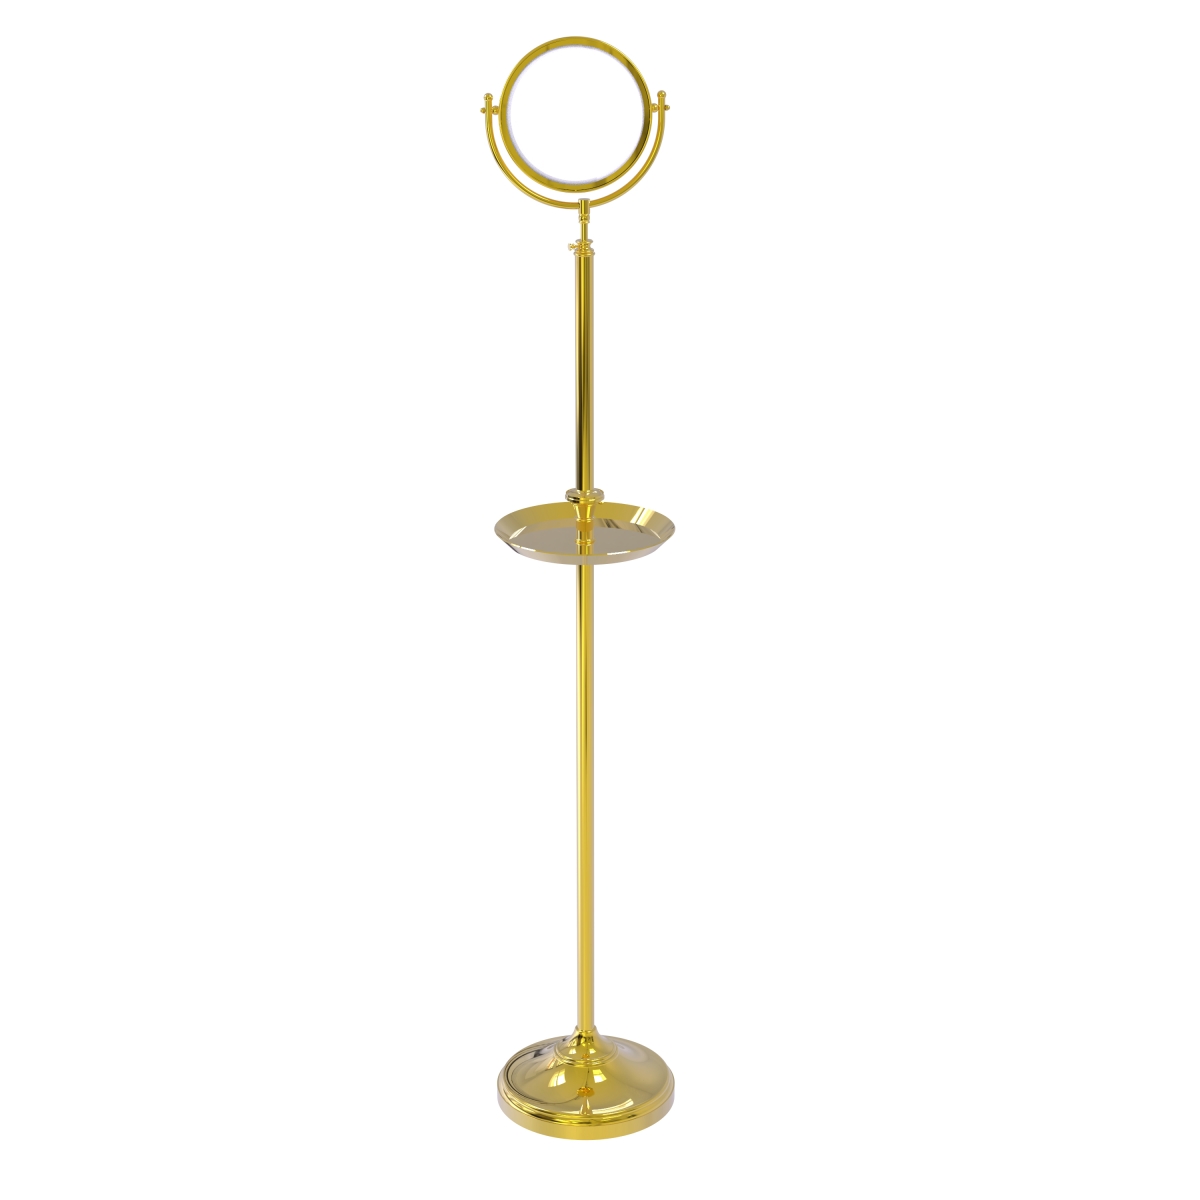 Allied Brass DMF-3-2X-UNL Floor Standing Make-Up Mirror 8 in. Diameter with 2X Magnification & Shaving Tray, Unlacquered Brass